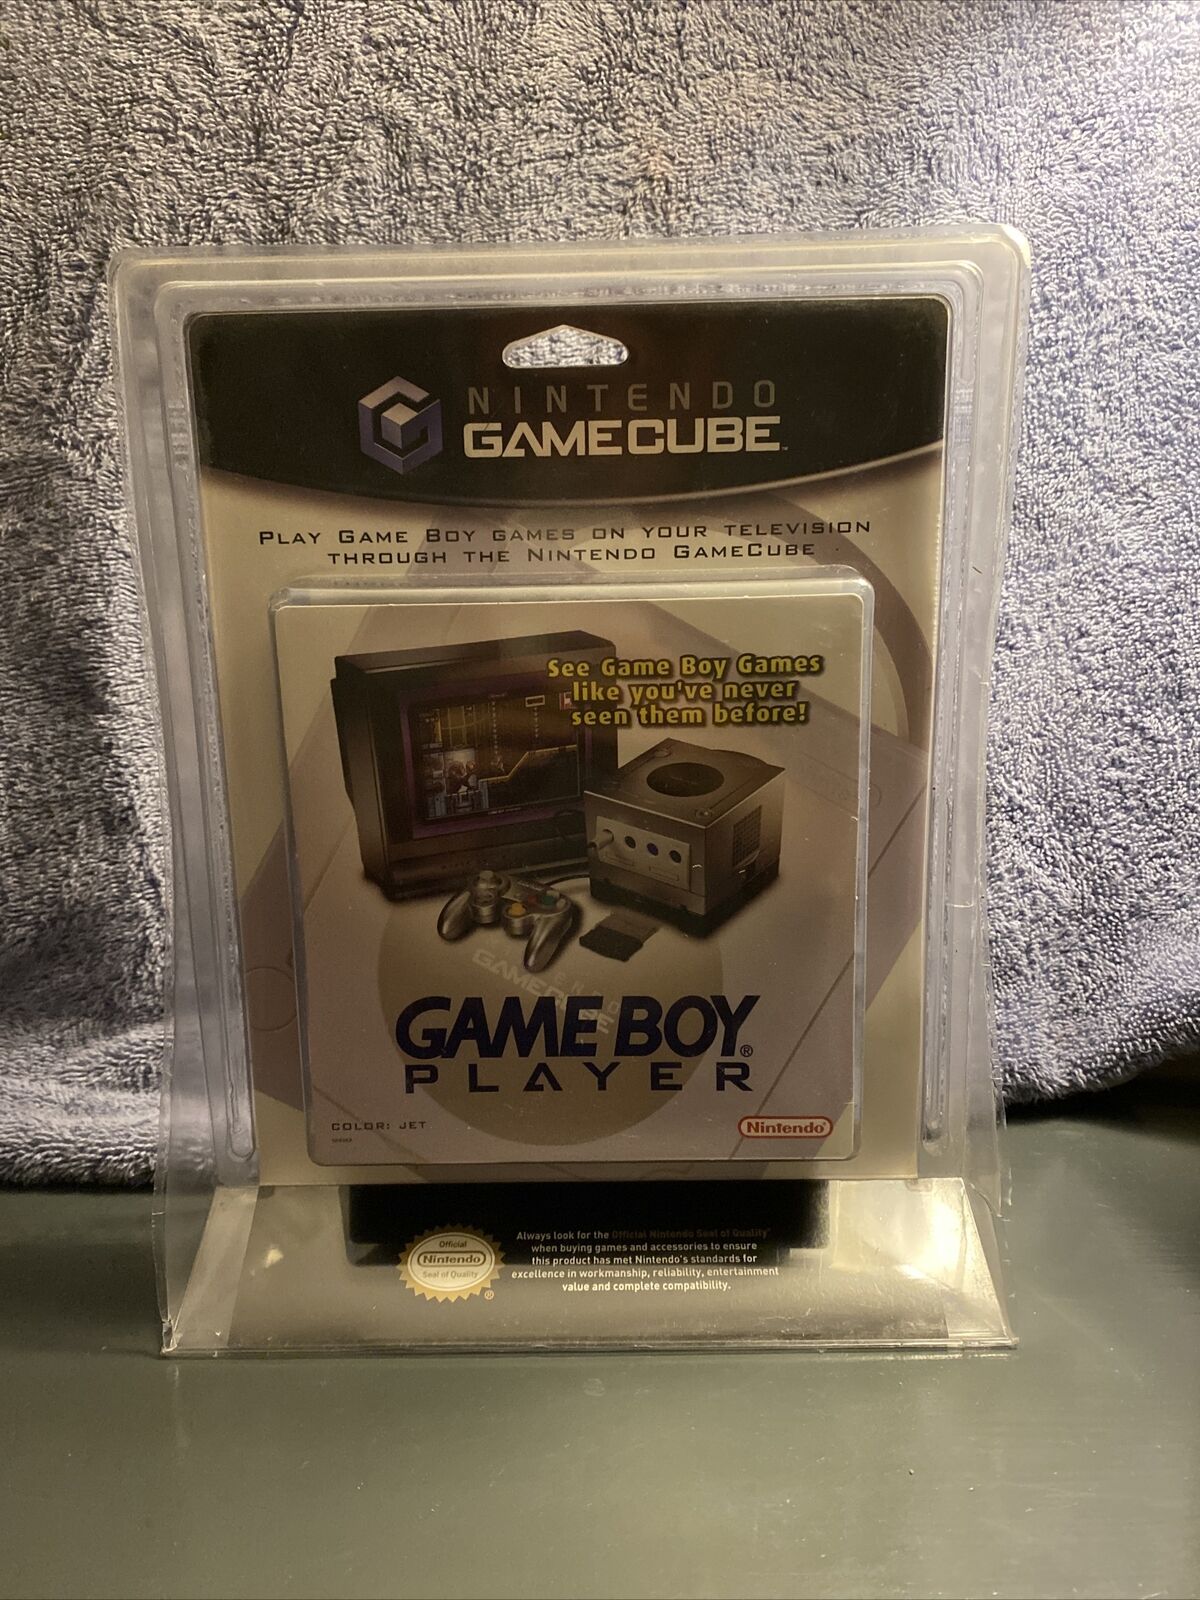 Nintendo Gameboy Player 中華のおせち贈り物 Gamecube Rare Package 最安値に挑戦 Complete With